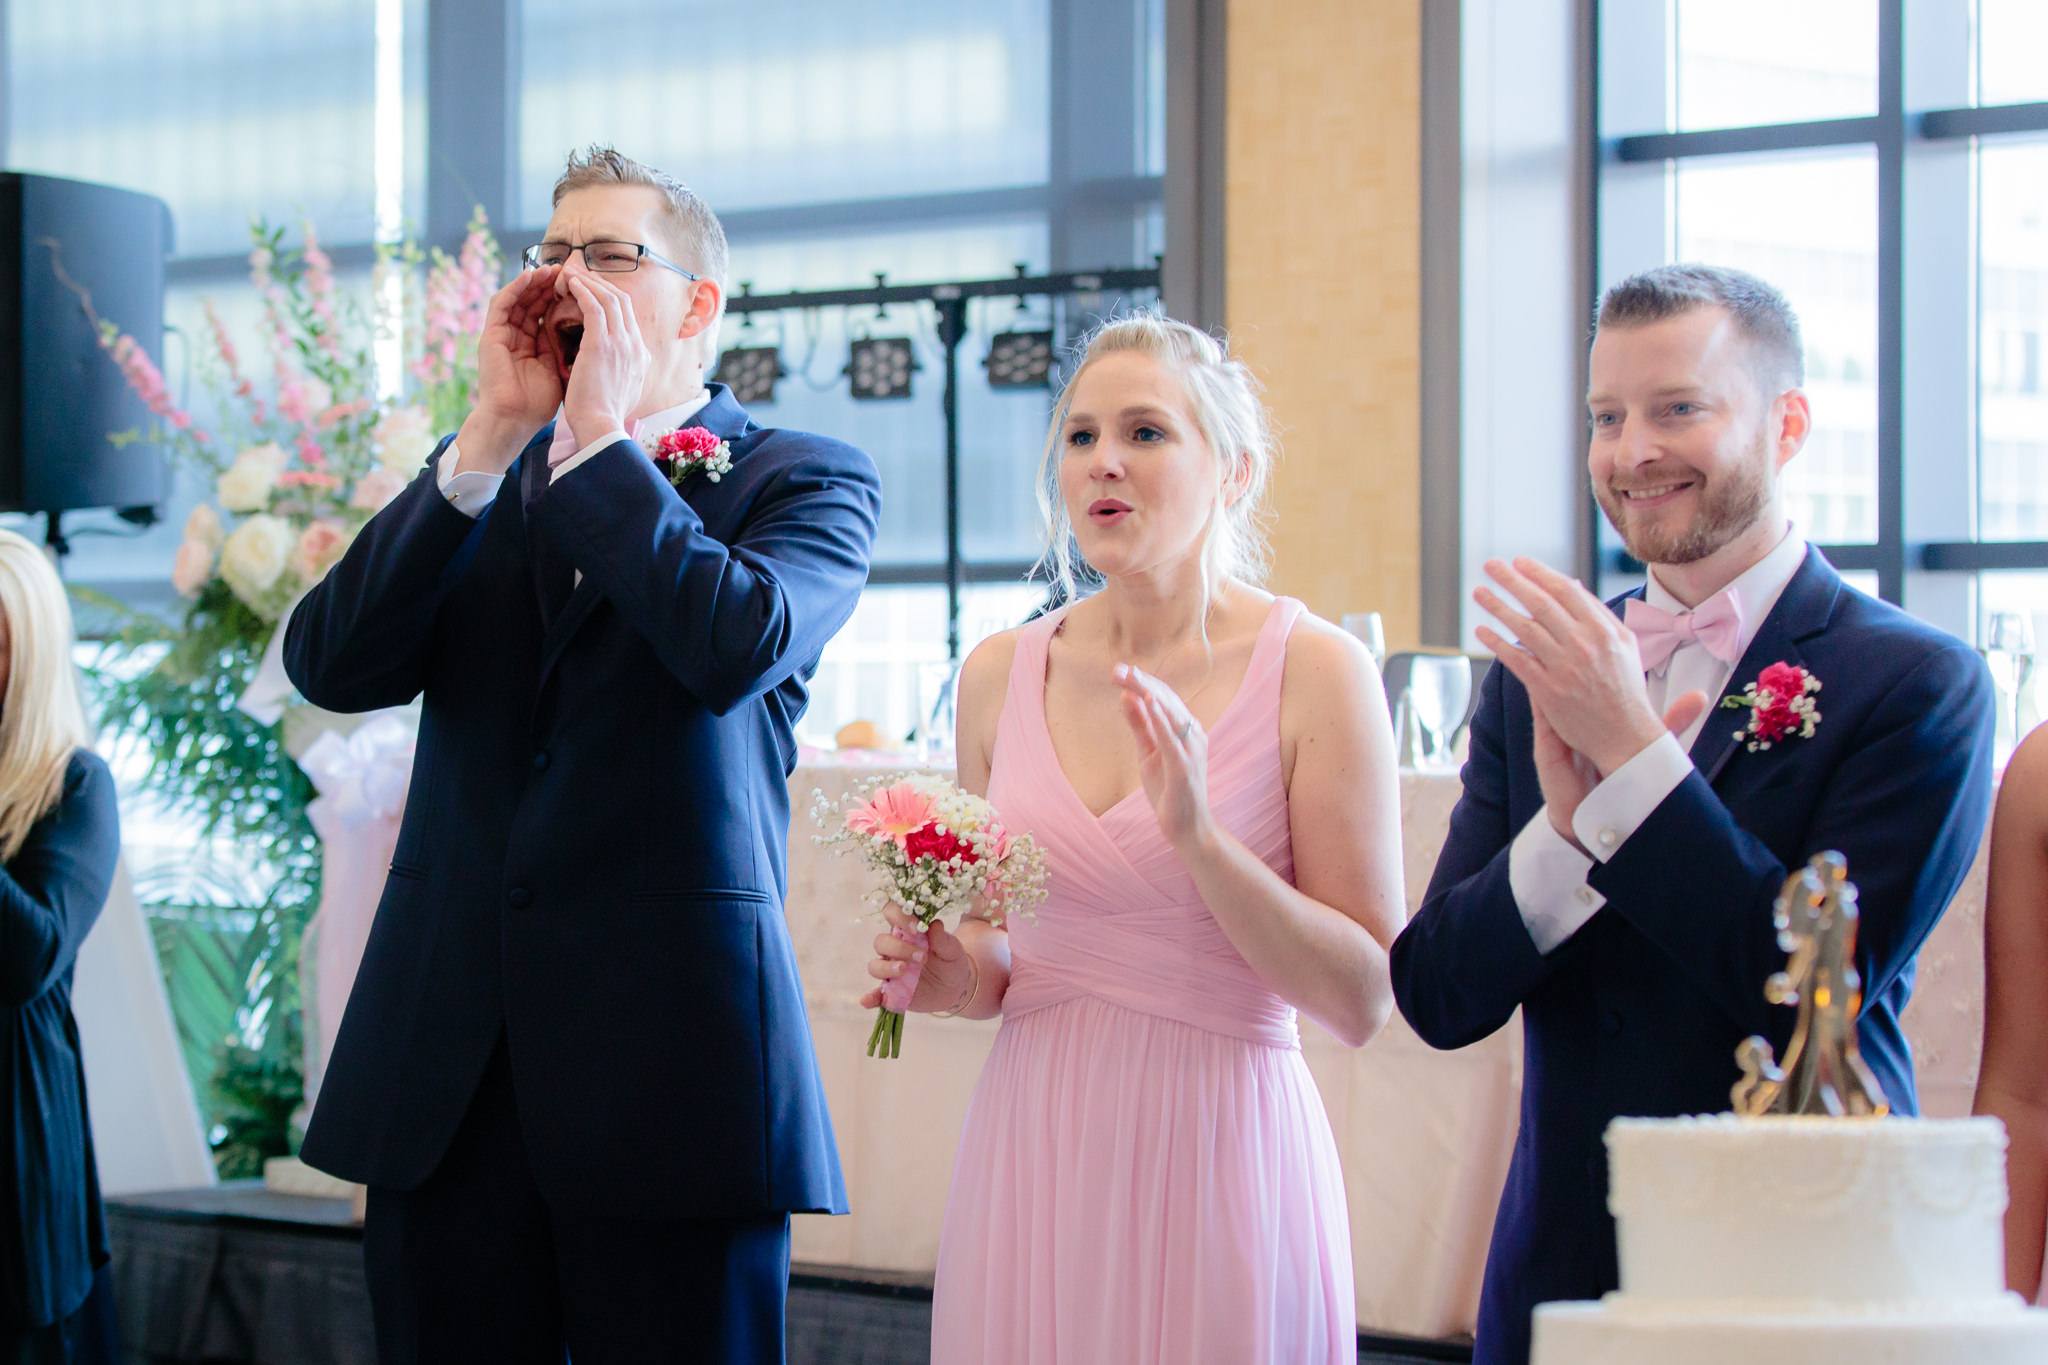 Brothers of the groom cheer as newlyweds enter their Duquesne University reception